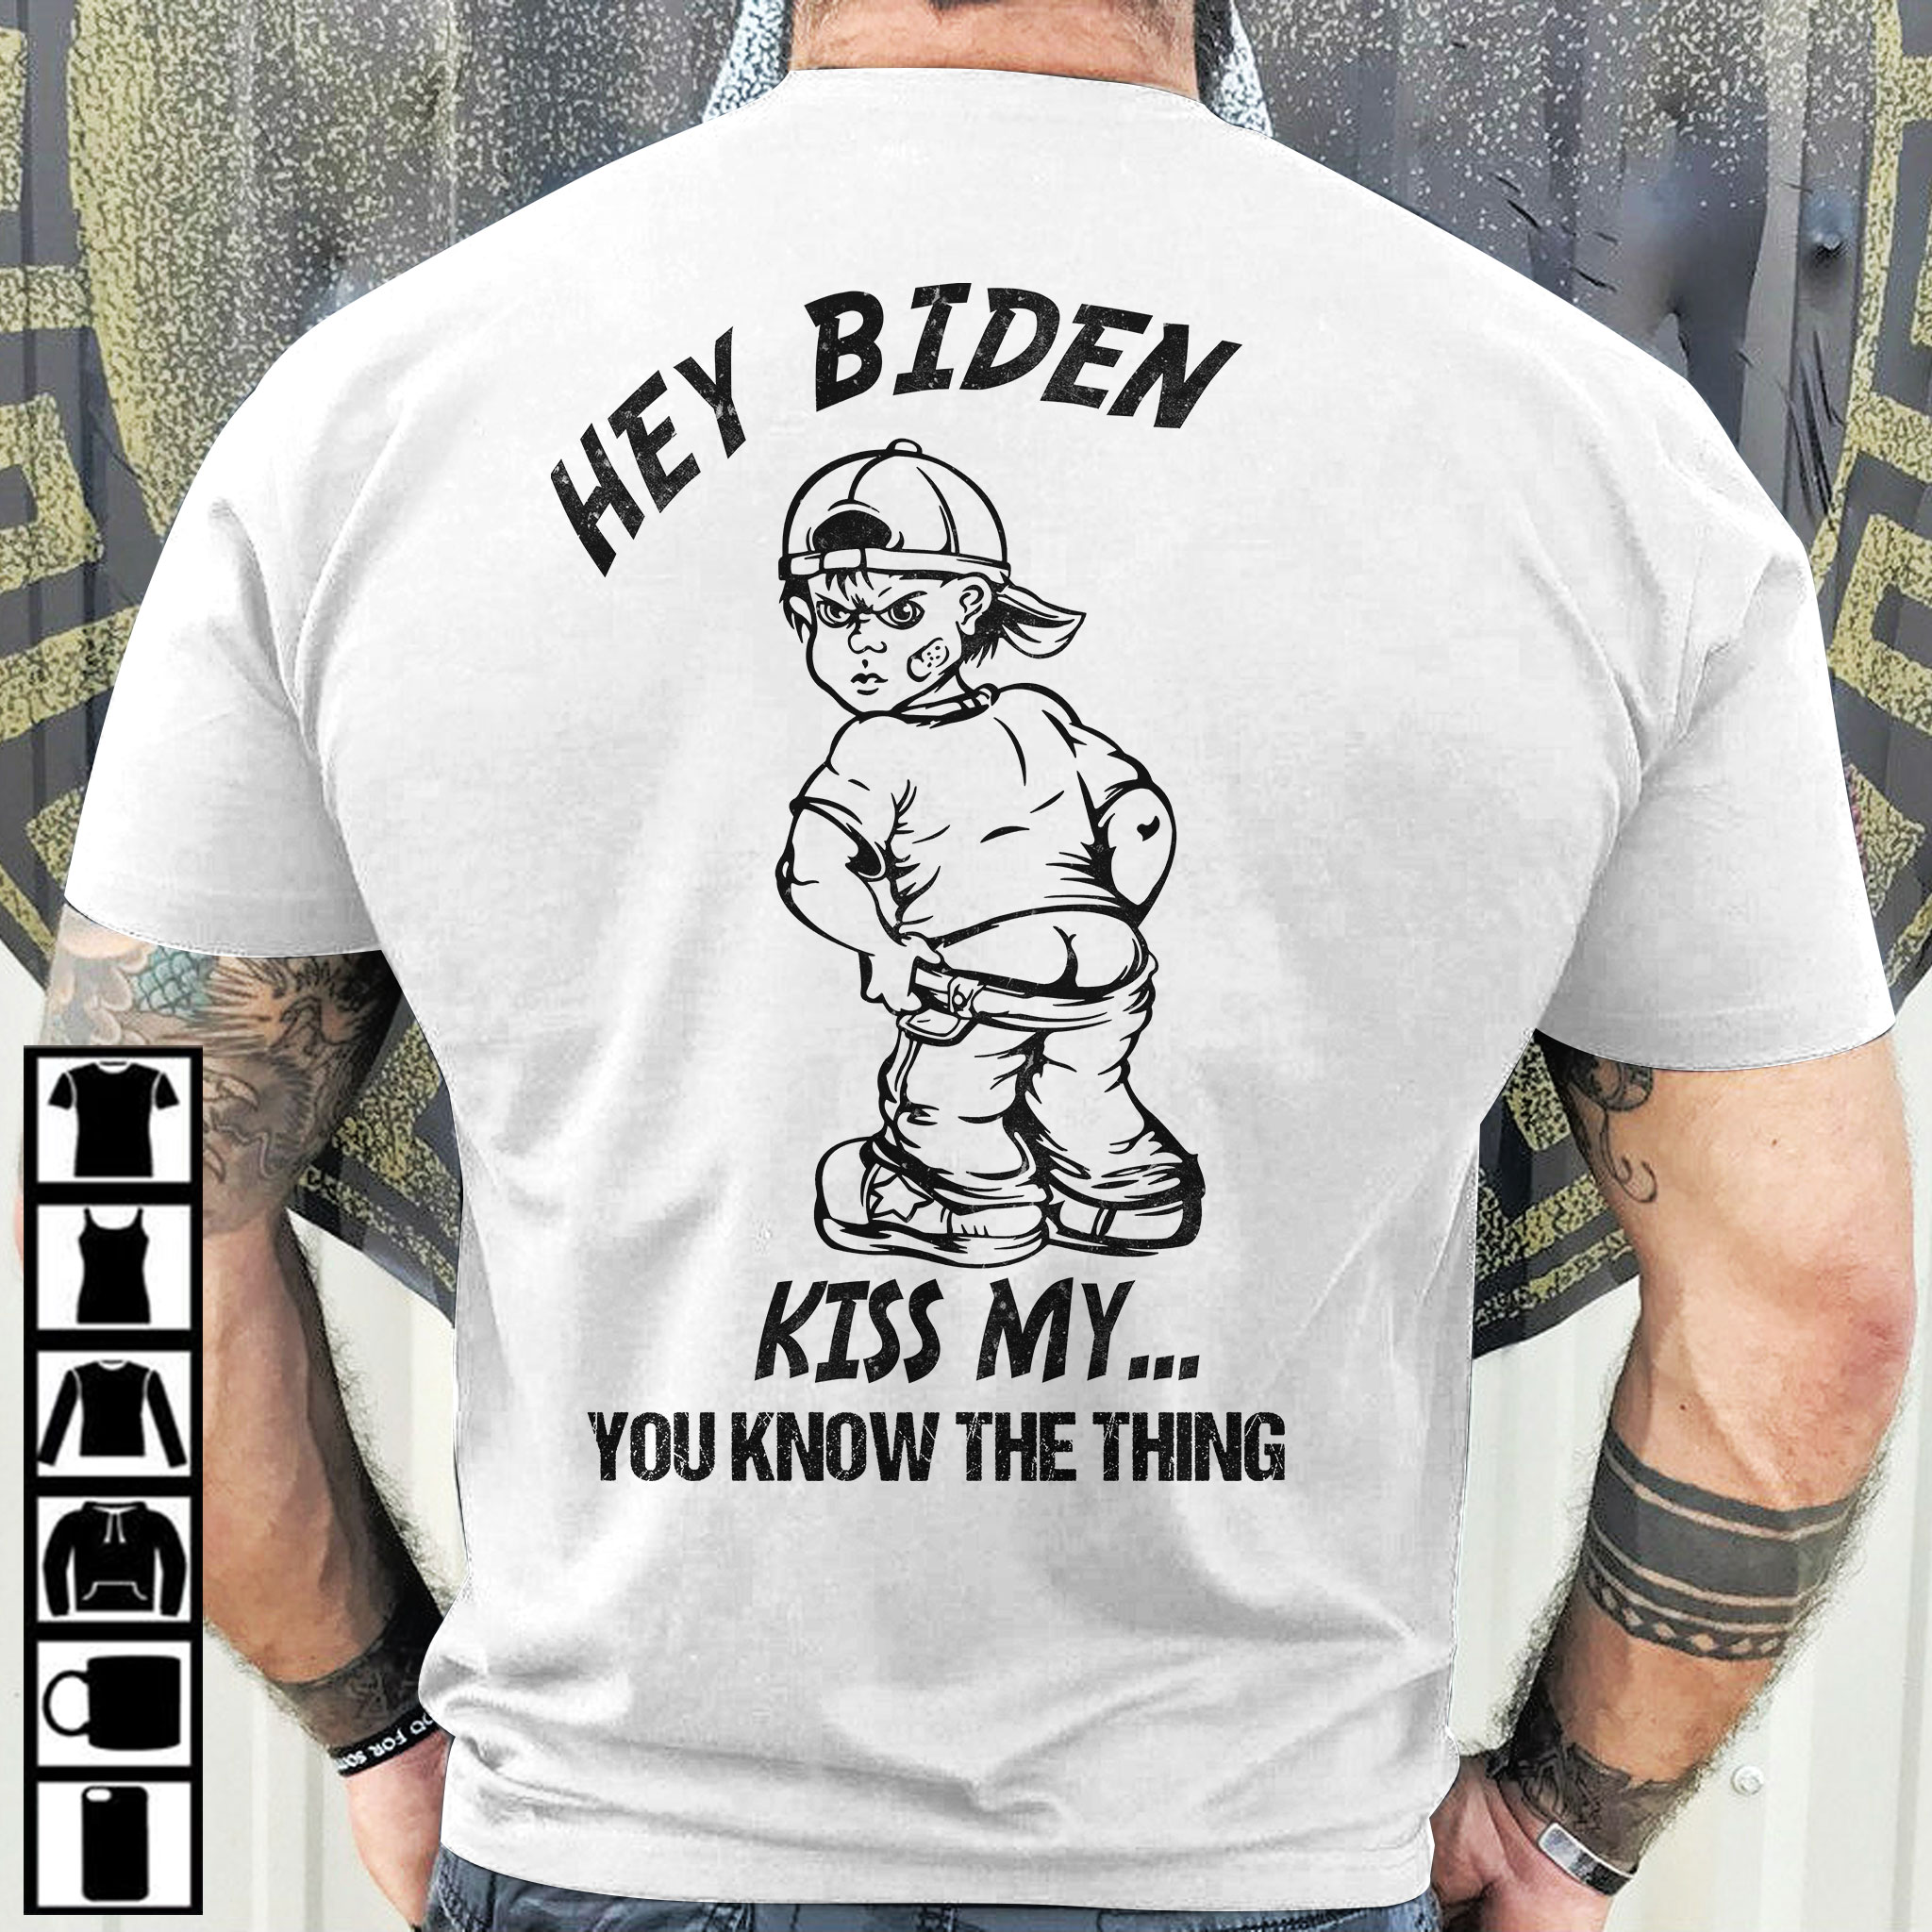 Hey Biden kiss my... You know the thing